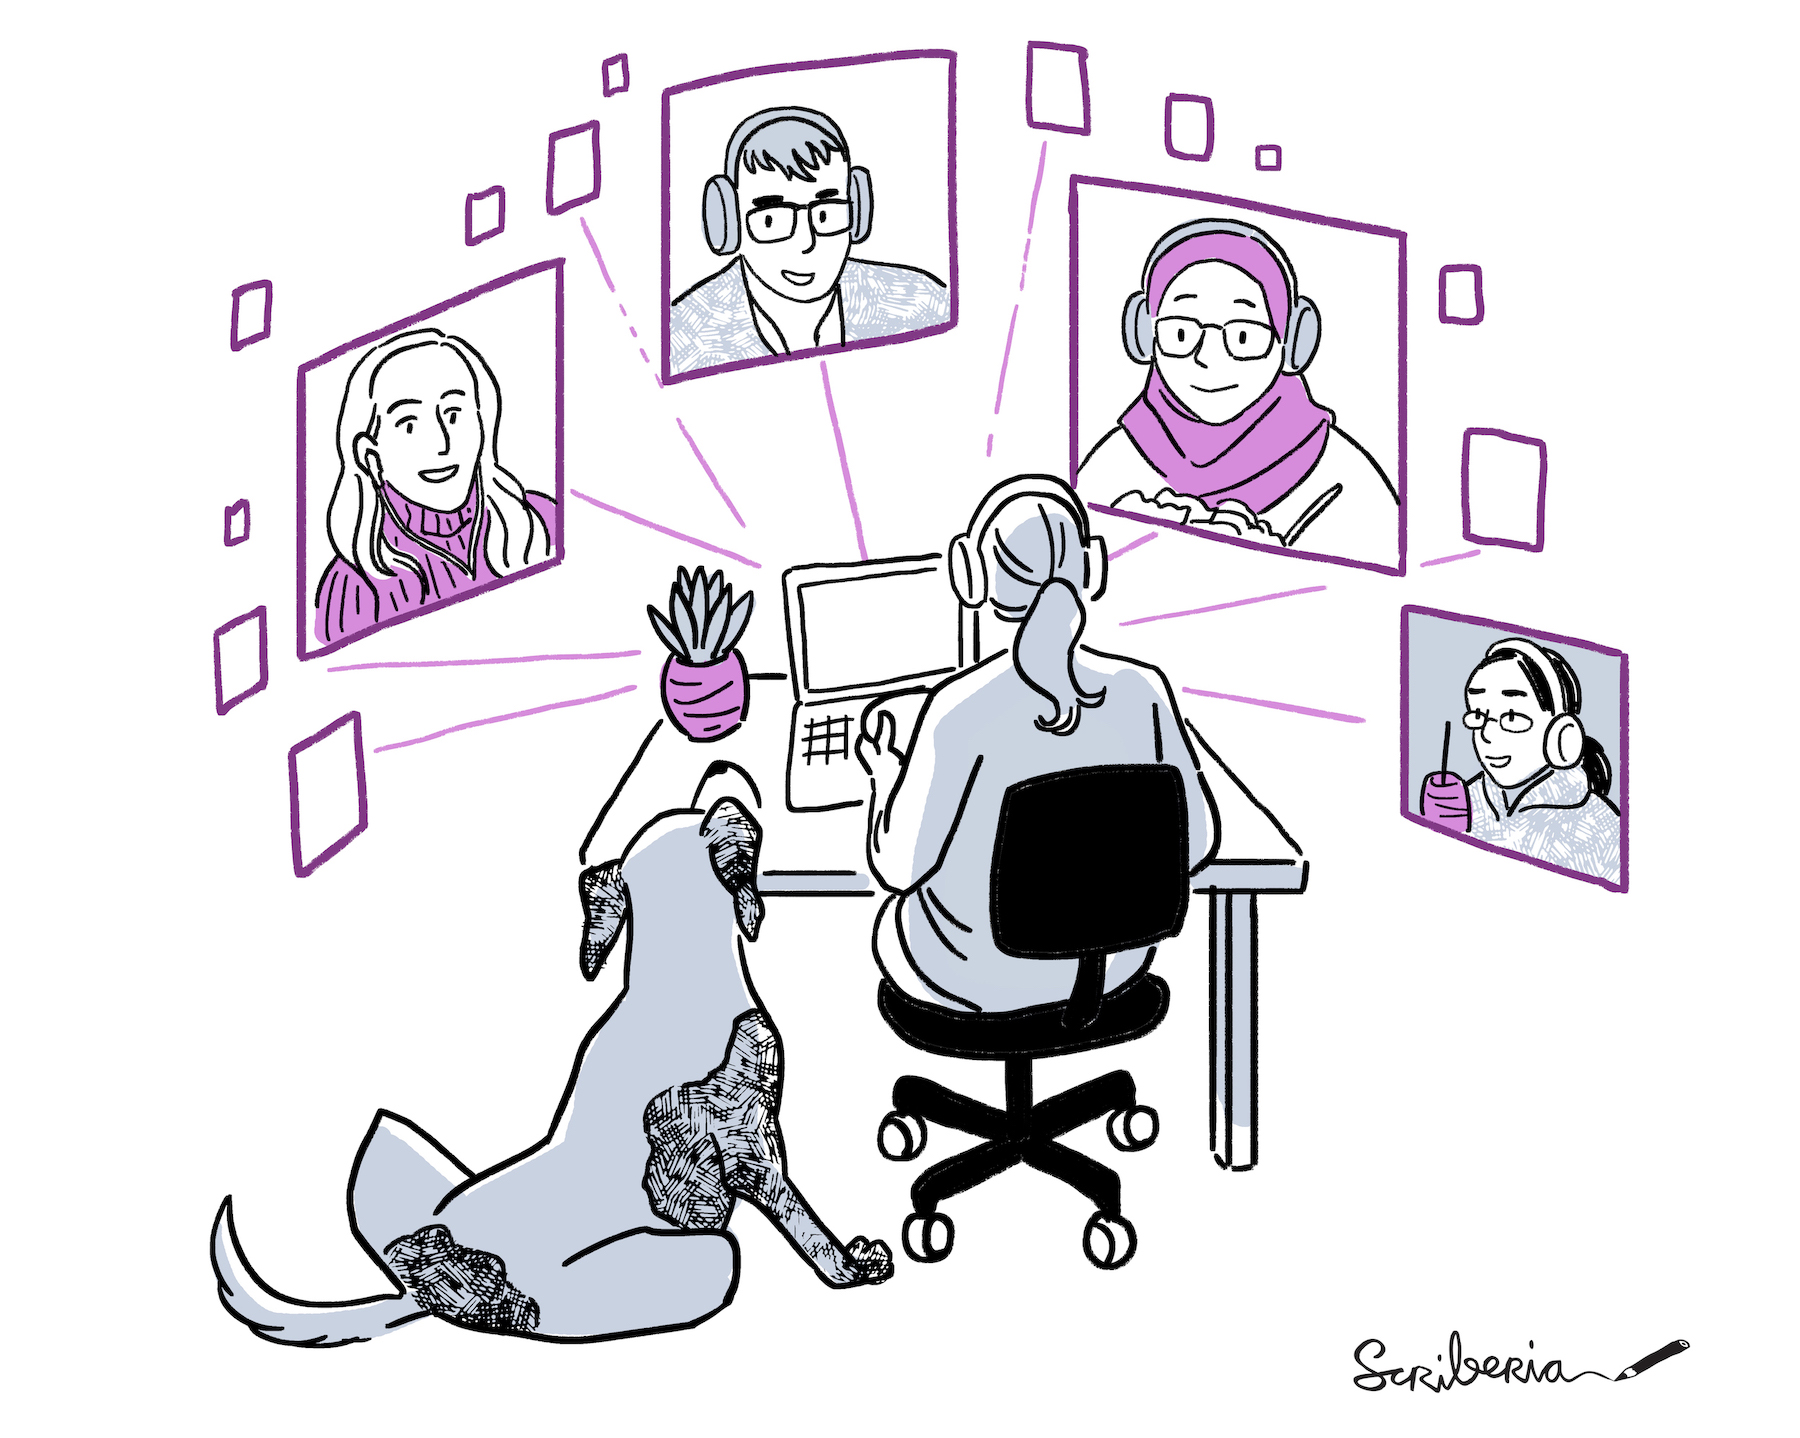 An illustration showing people participating in a Turing Way Book Dash remotely. In the foreground a person is shown from behind working at their desk. They are working on their laptop computer, wearing headphones. To their left their dog is sitting and watching. Above the computer is a representation of remote collaboration using video calls. Four other Book Dash participants are shown in boxes emanating from the computer.